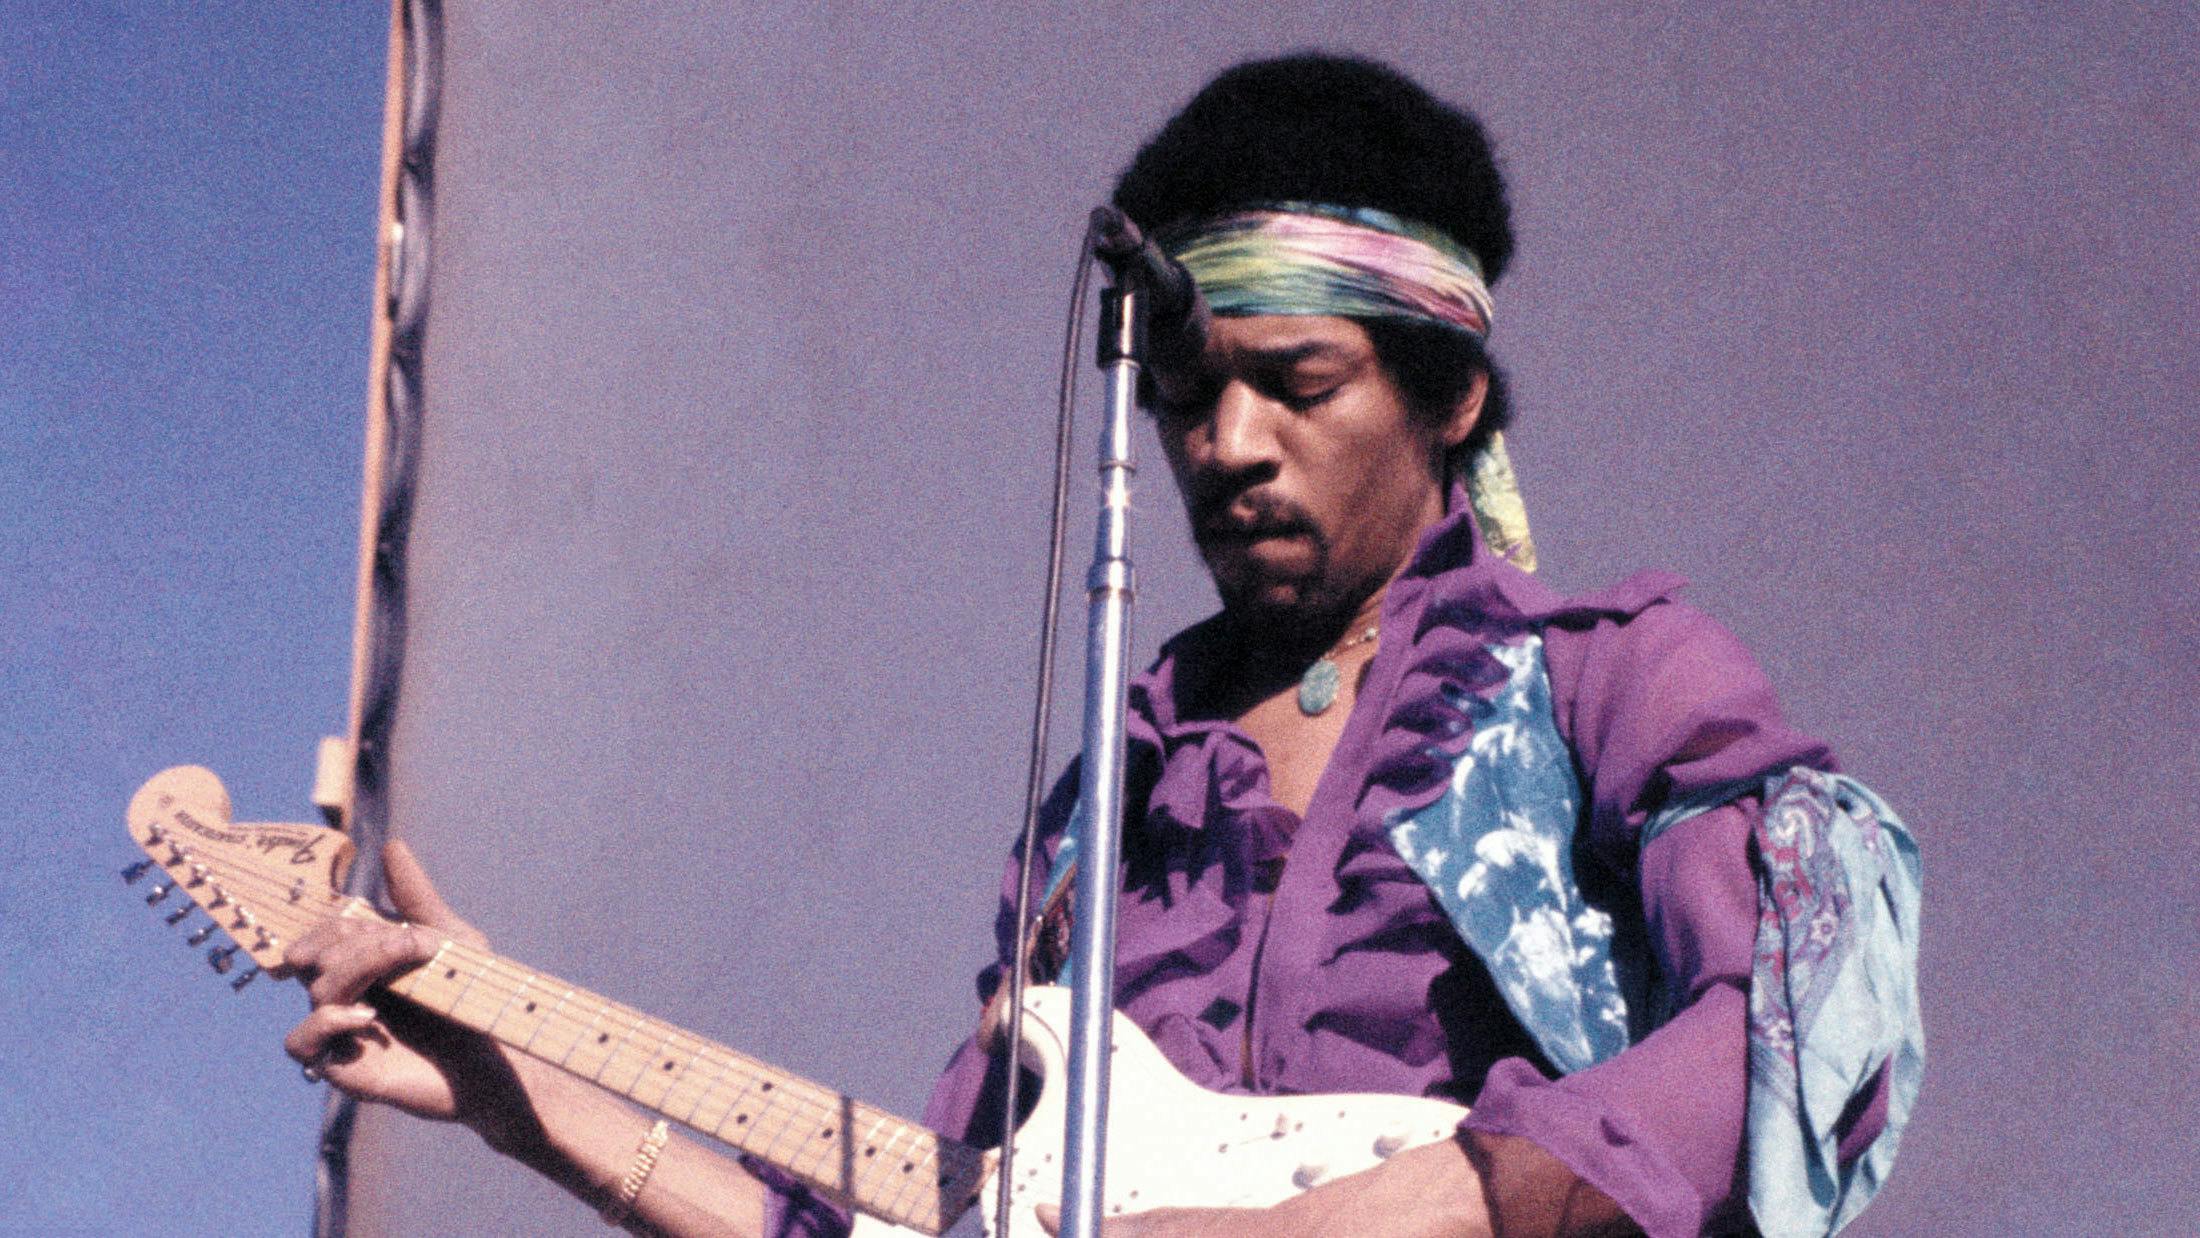 “His impact is beyond solar systems”: Remembering Jimi Hendrix, the greatest guitarist who ever lived